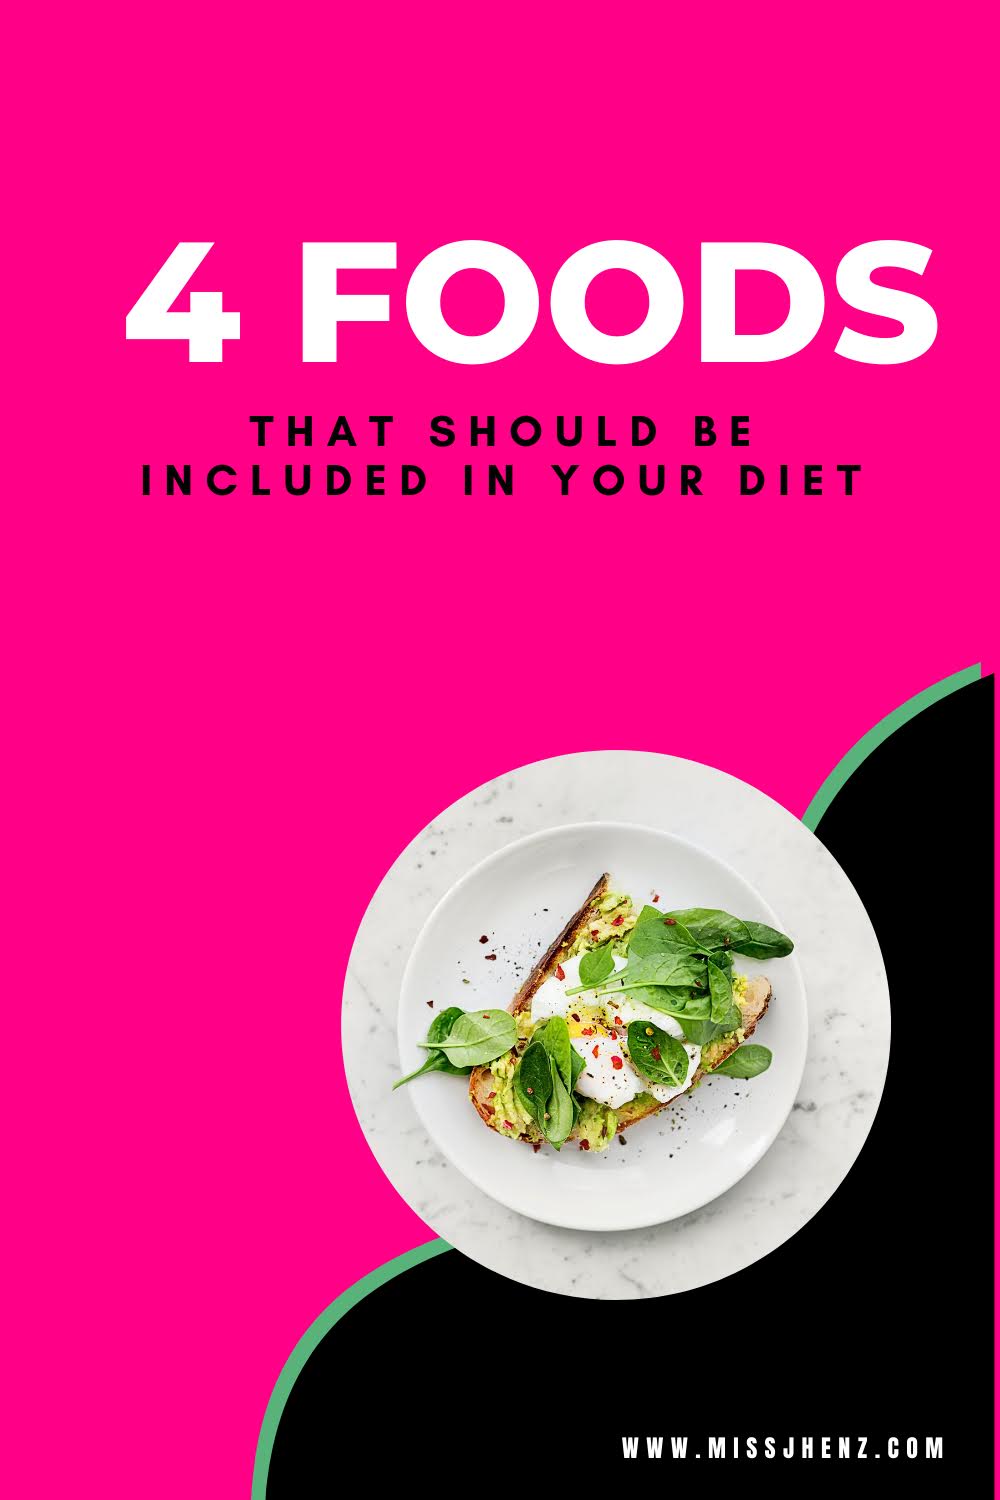 4 Foods that Should Be Included in Your Diet